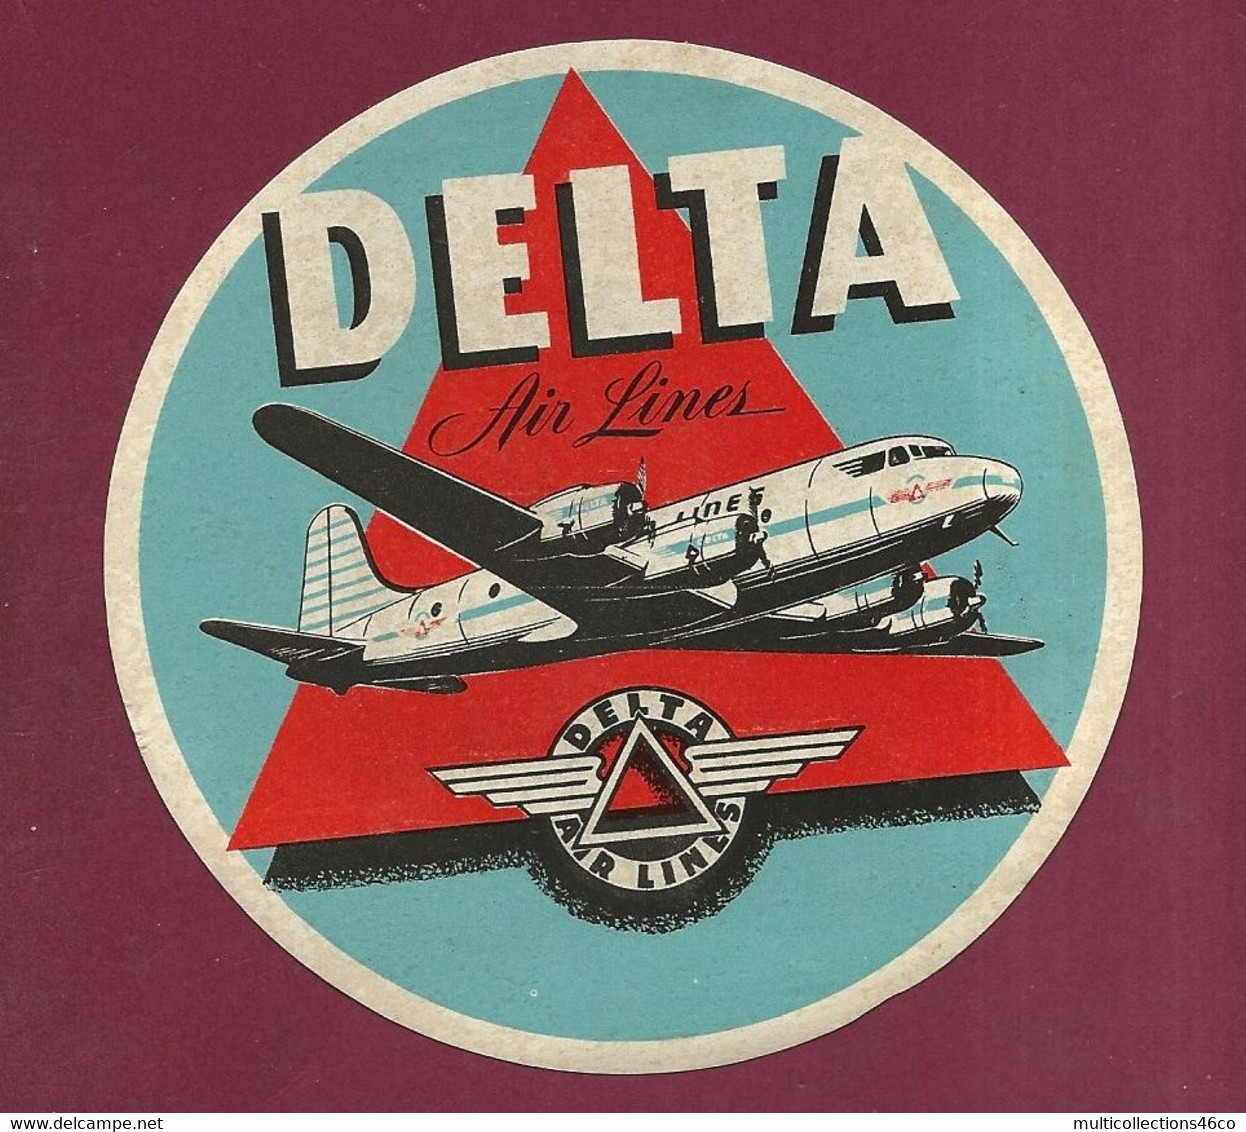 060922 - AVIATION ETIQUETTE A BAGAGE - DELTA AIR LINES - Baggage Labels & Tags